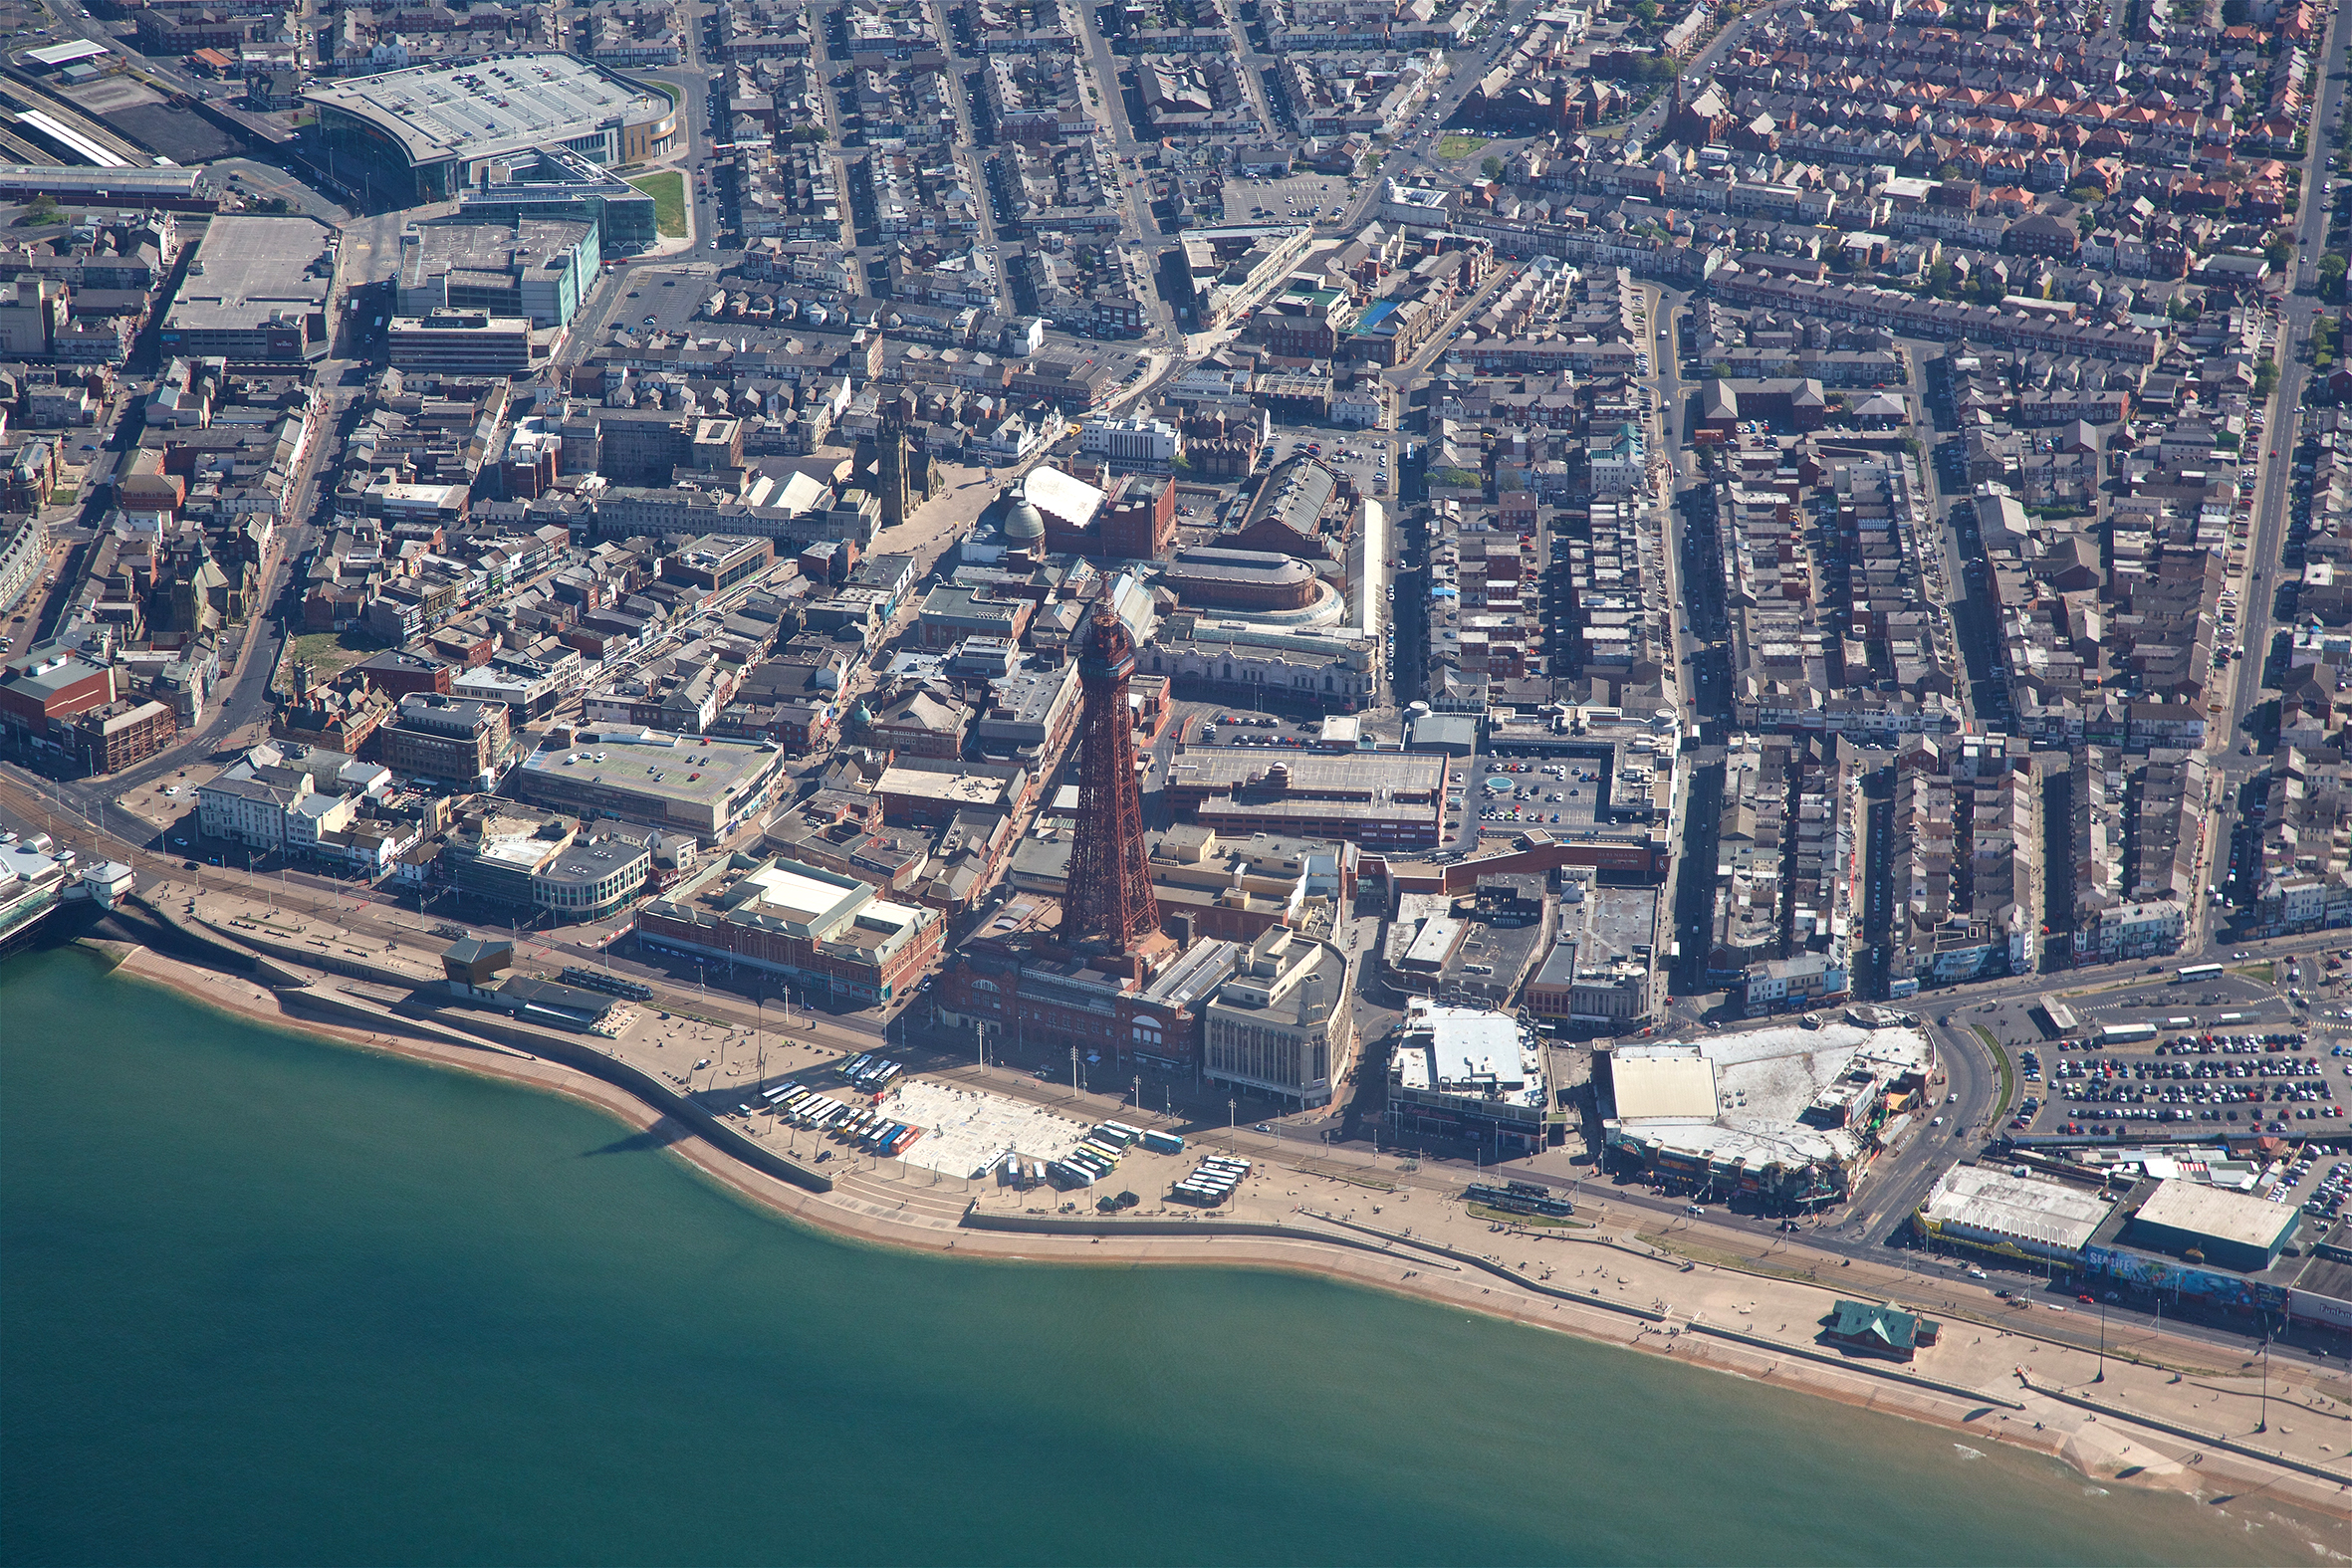 Blackpool from above